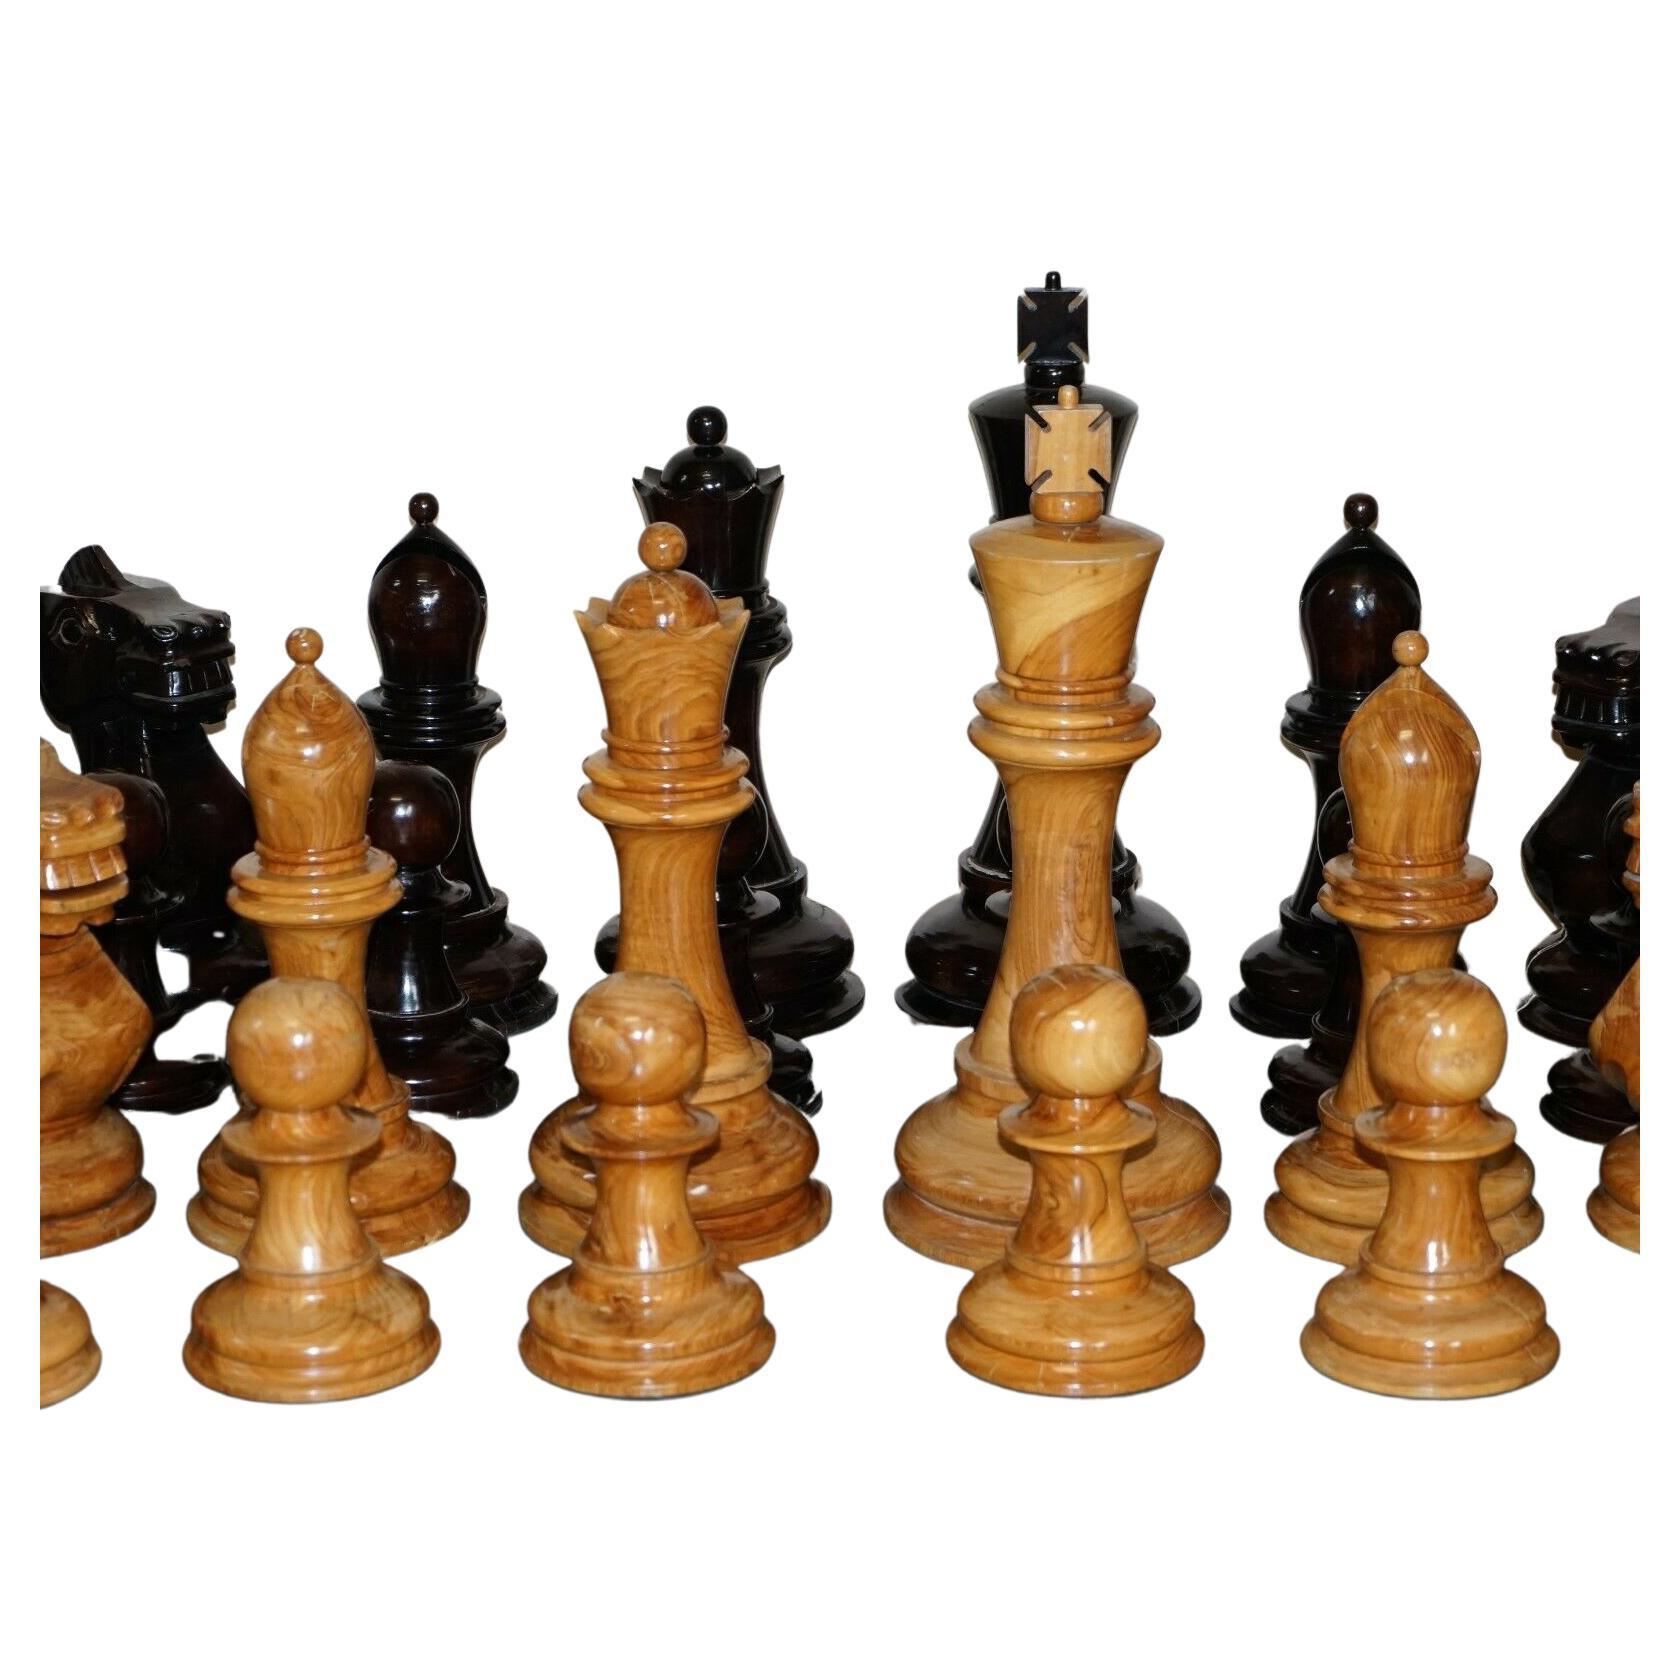 Giant Hand Carved Wood Chess Set Tallest Piece Beautiful Timber Patina